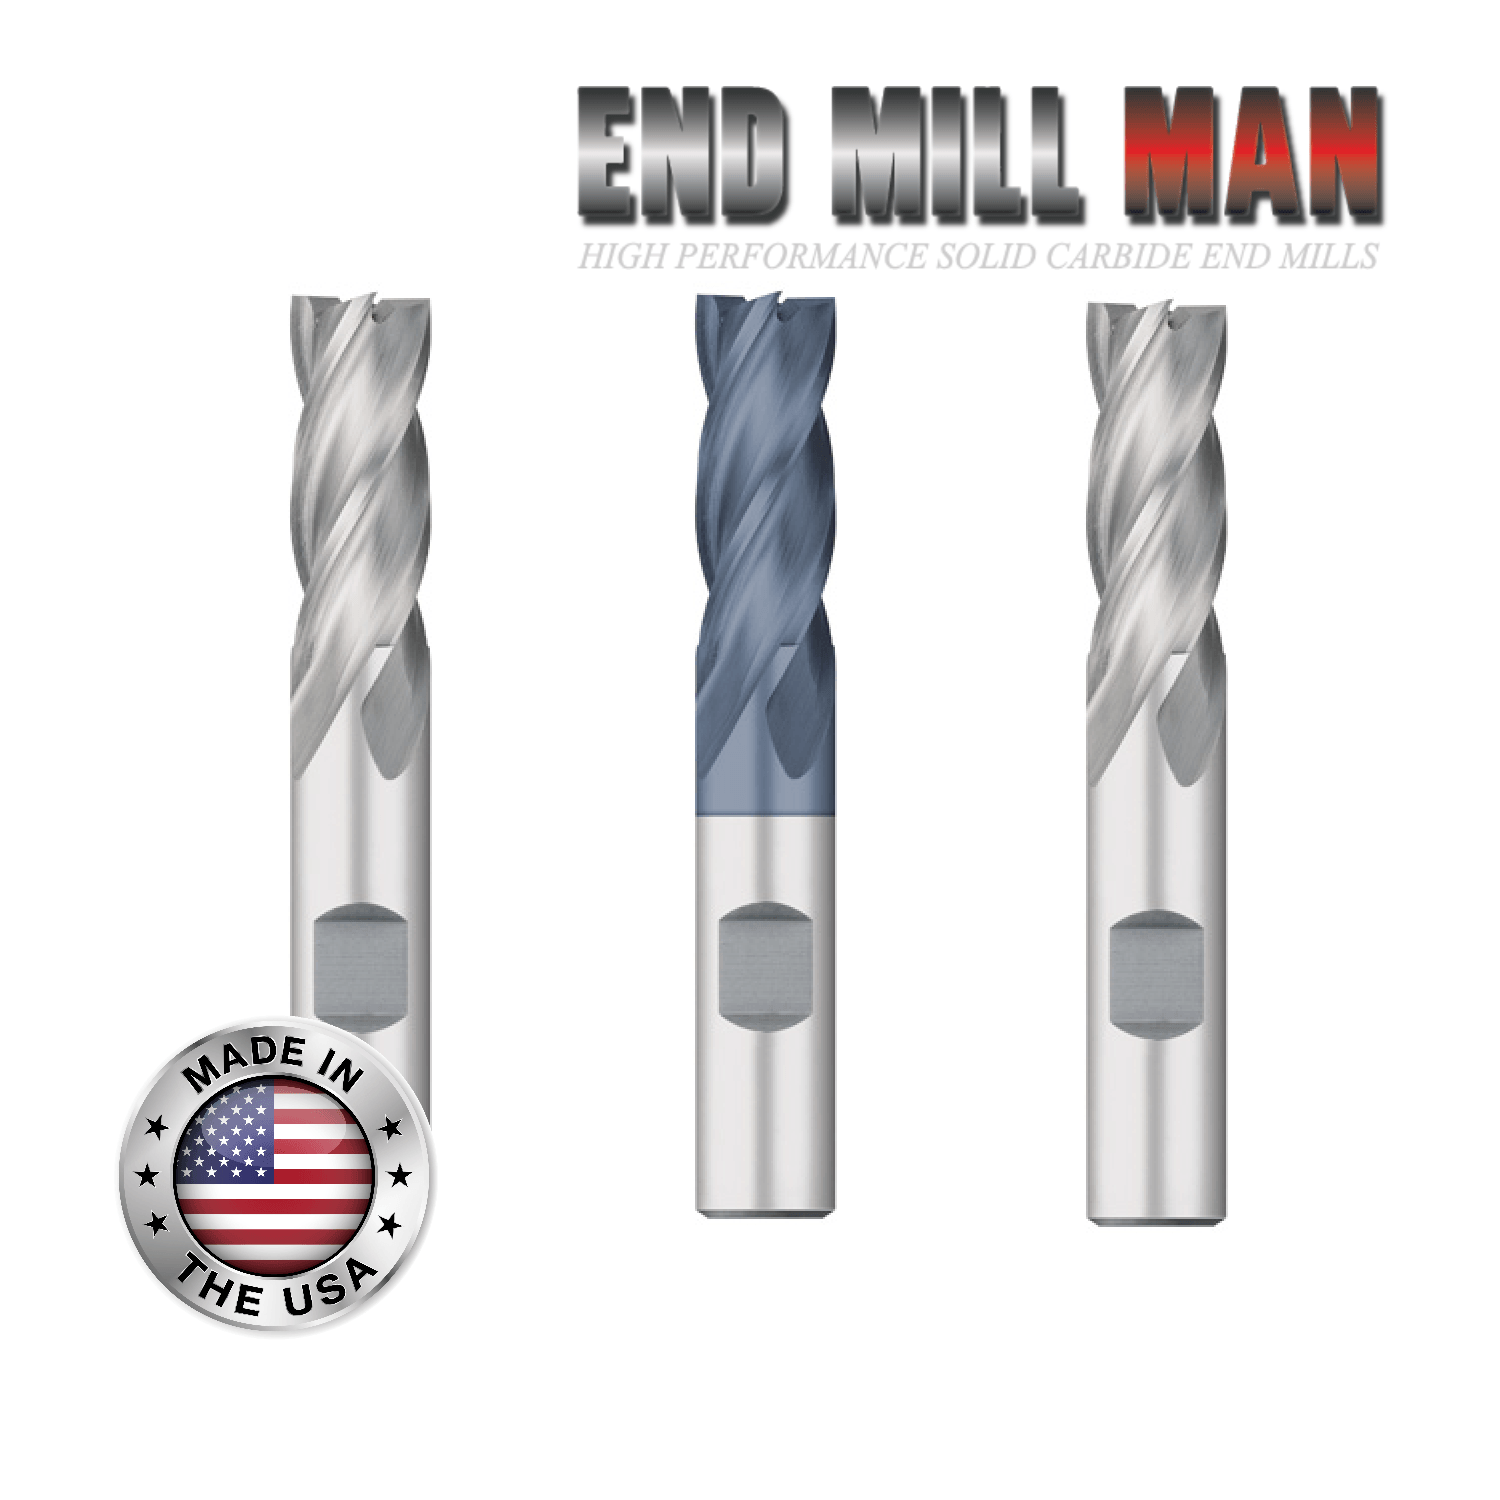 1-1/2" x 2" LOC (3 Pack) HSS 4-6 Flute End Mills (1-1/4" Shanks) - The End Mill Store 